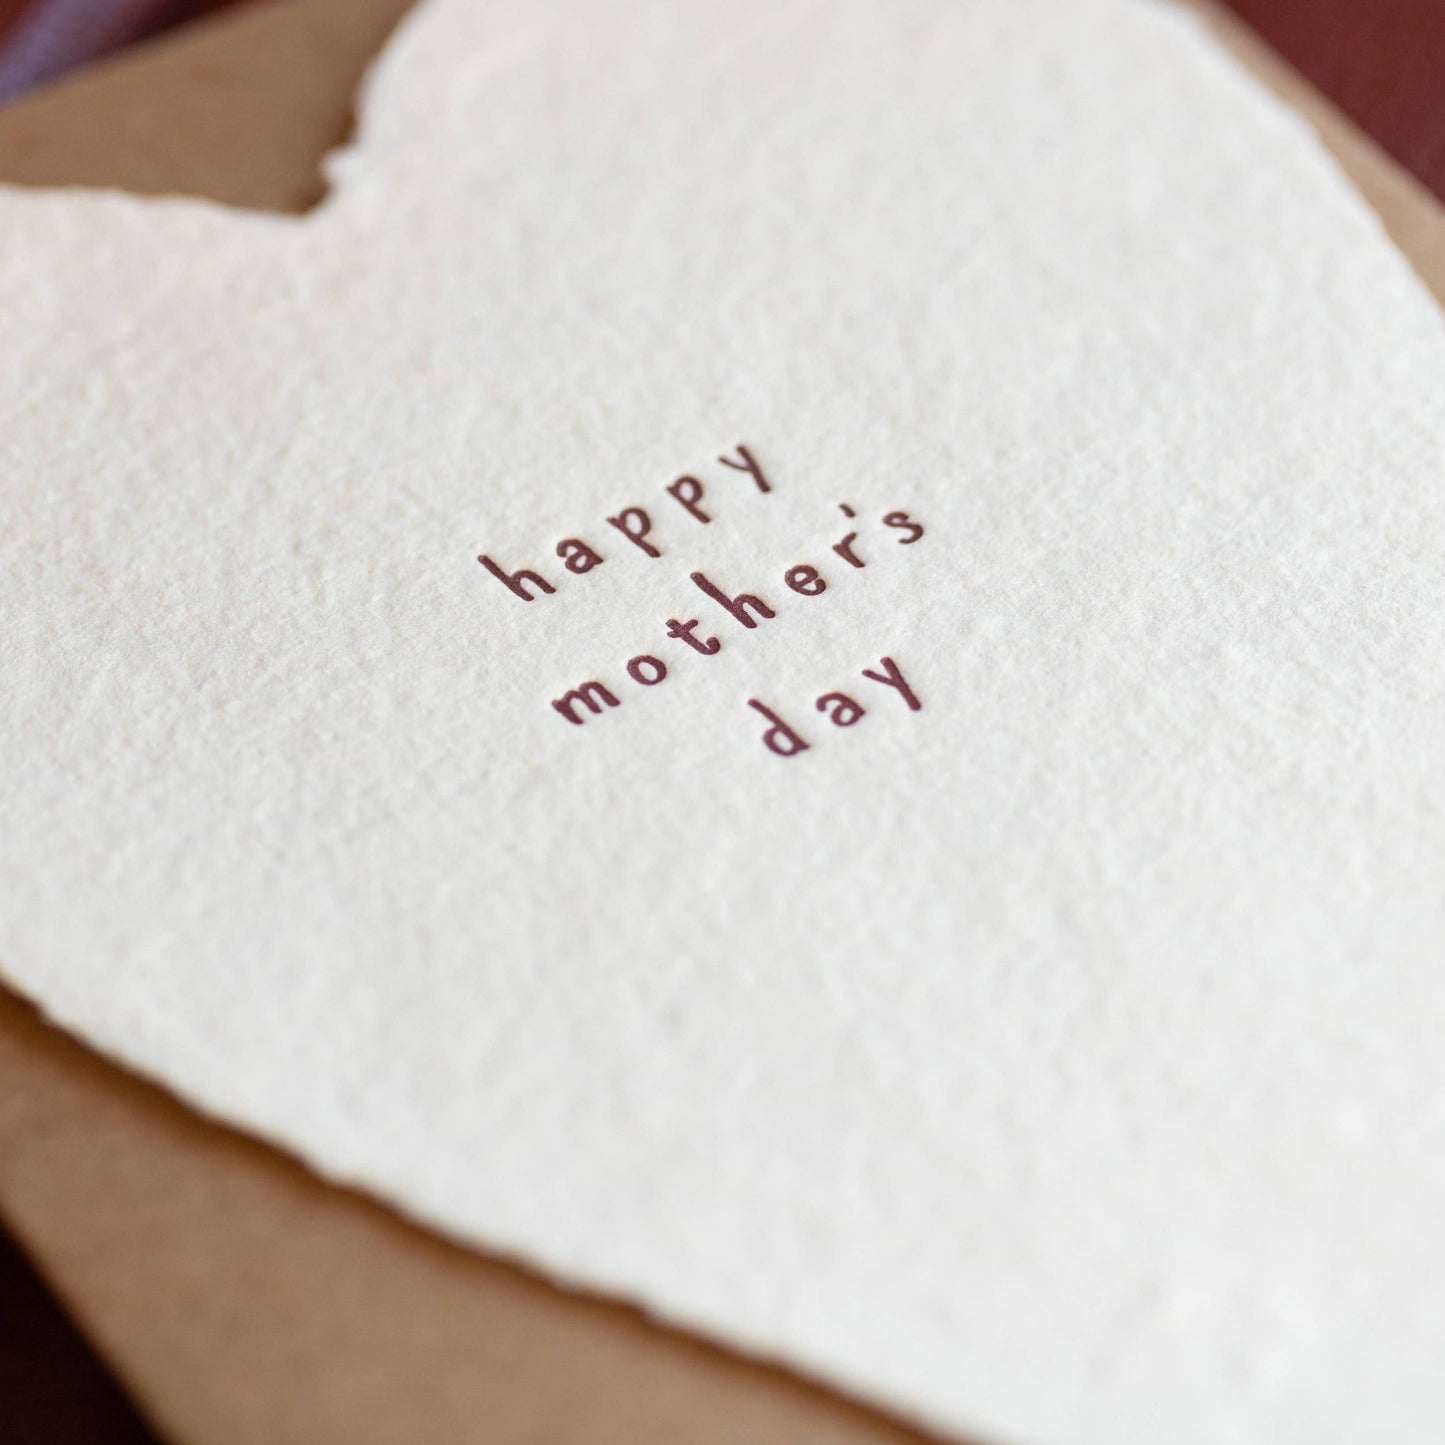 Happy Mother's Day Greeted Heart Handmade Paper Letterpress